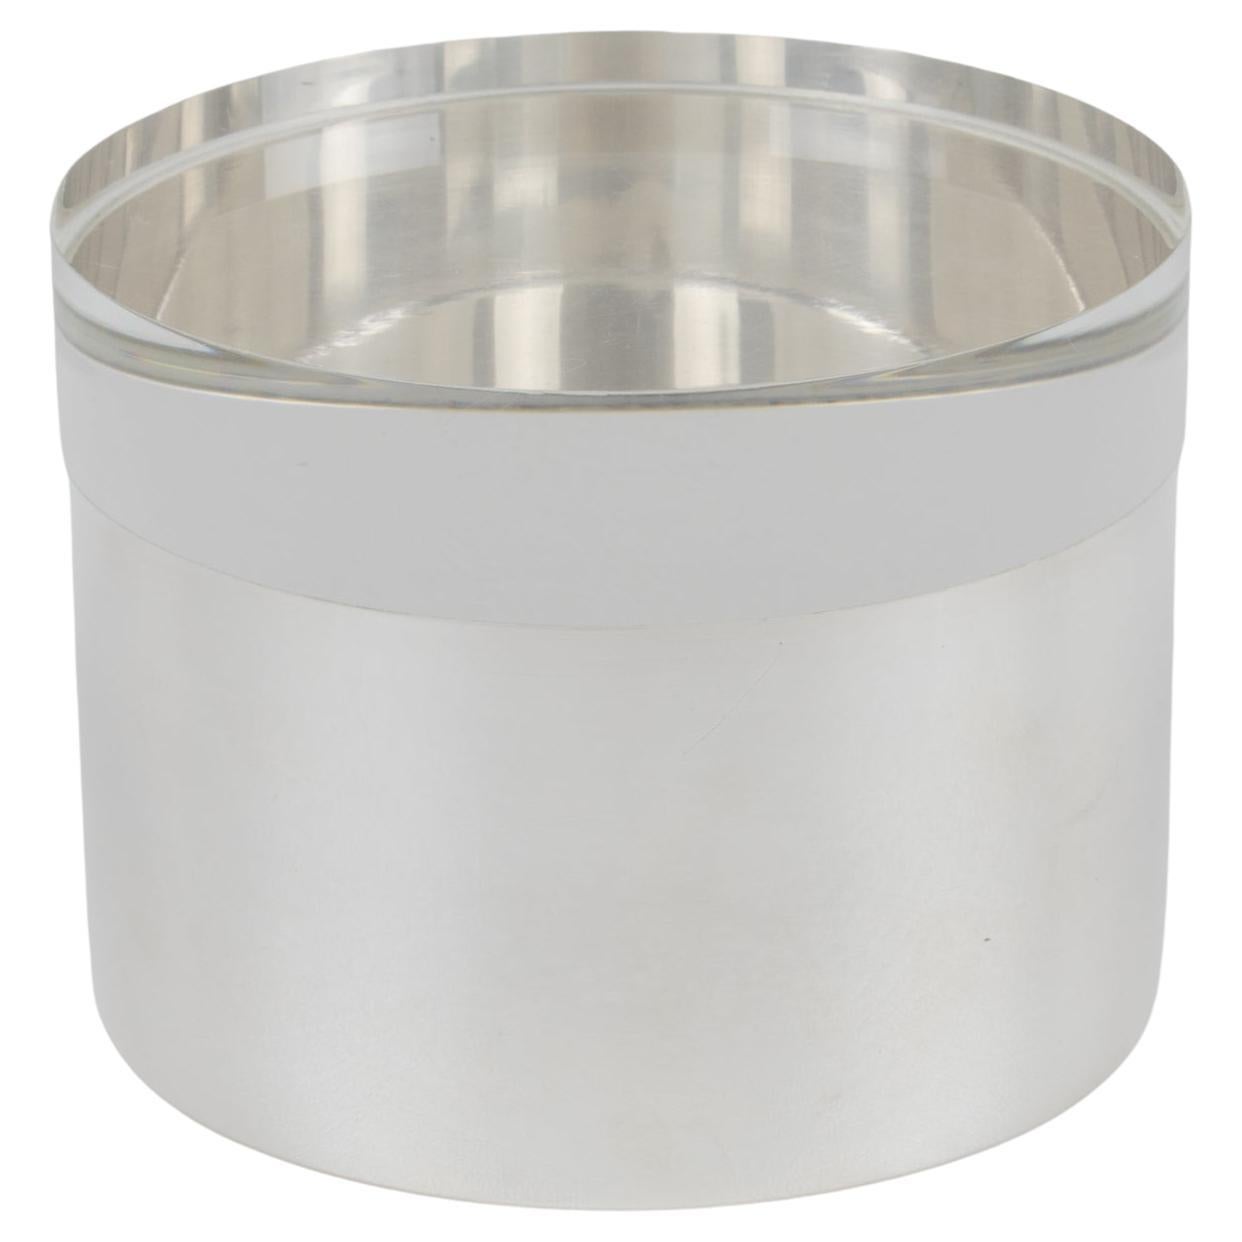 Silver Plate and Lucite Round Box by Debladis, Paris